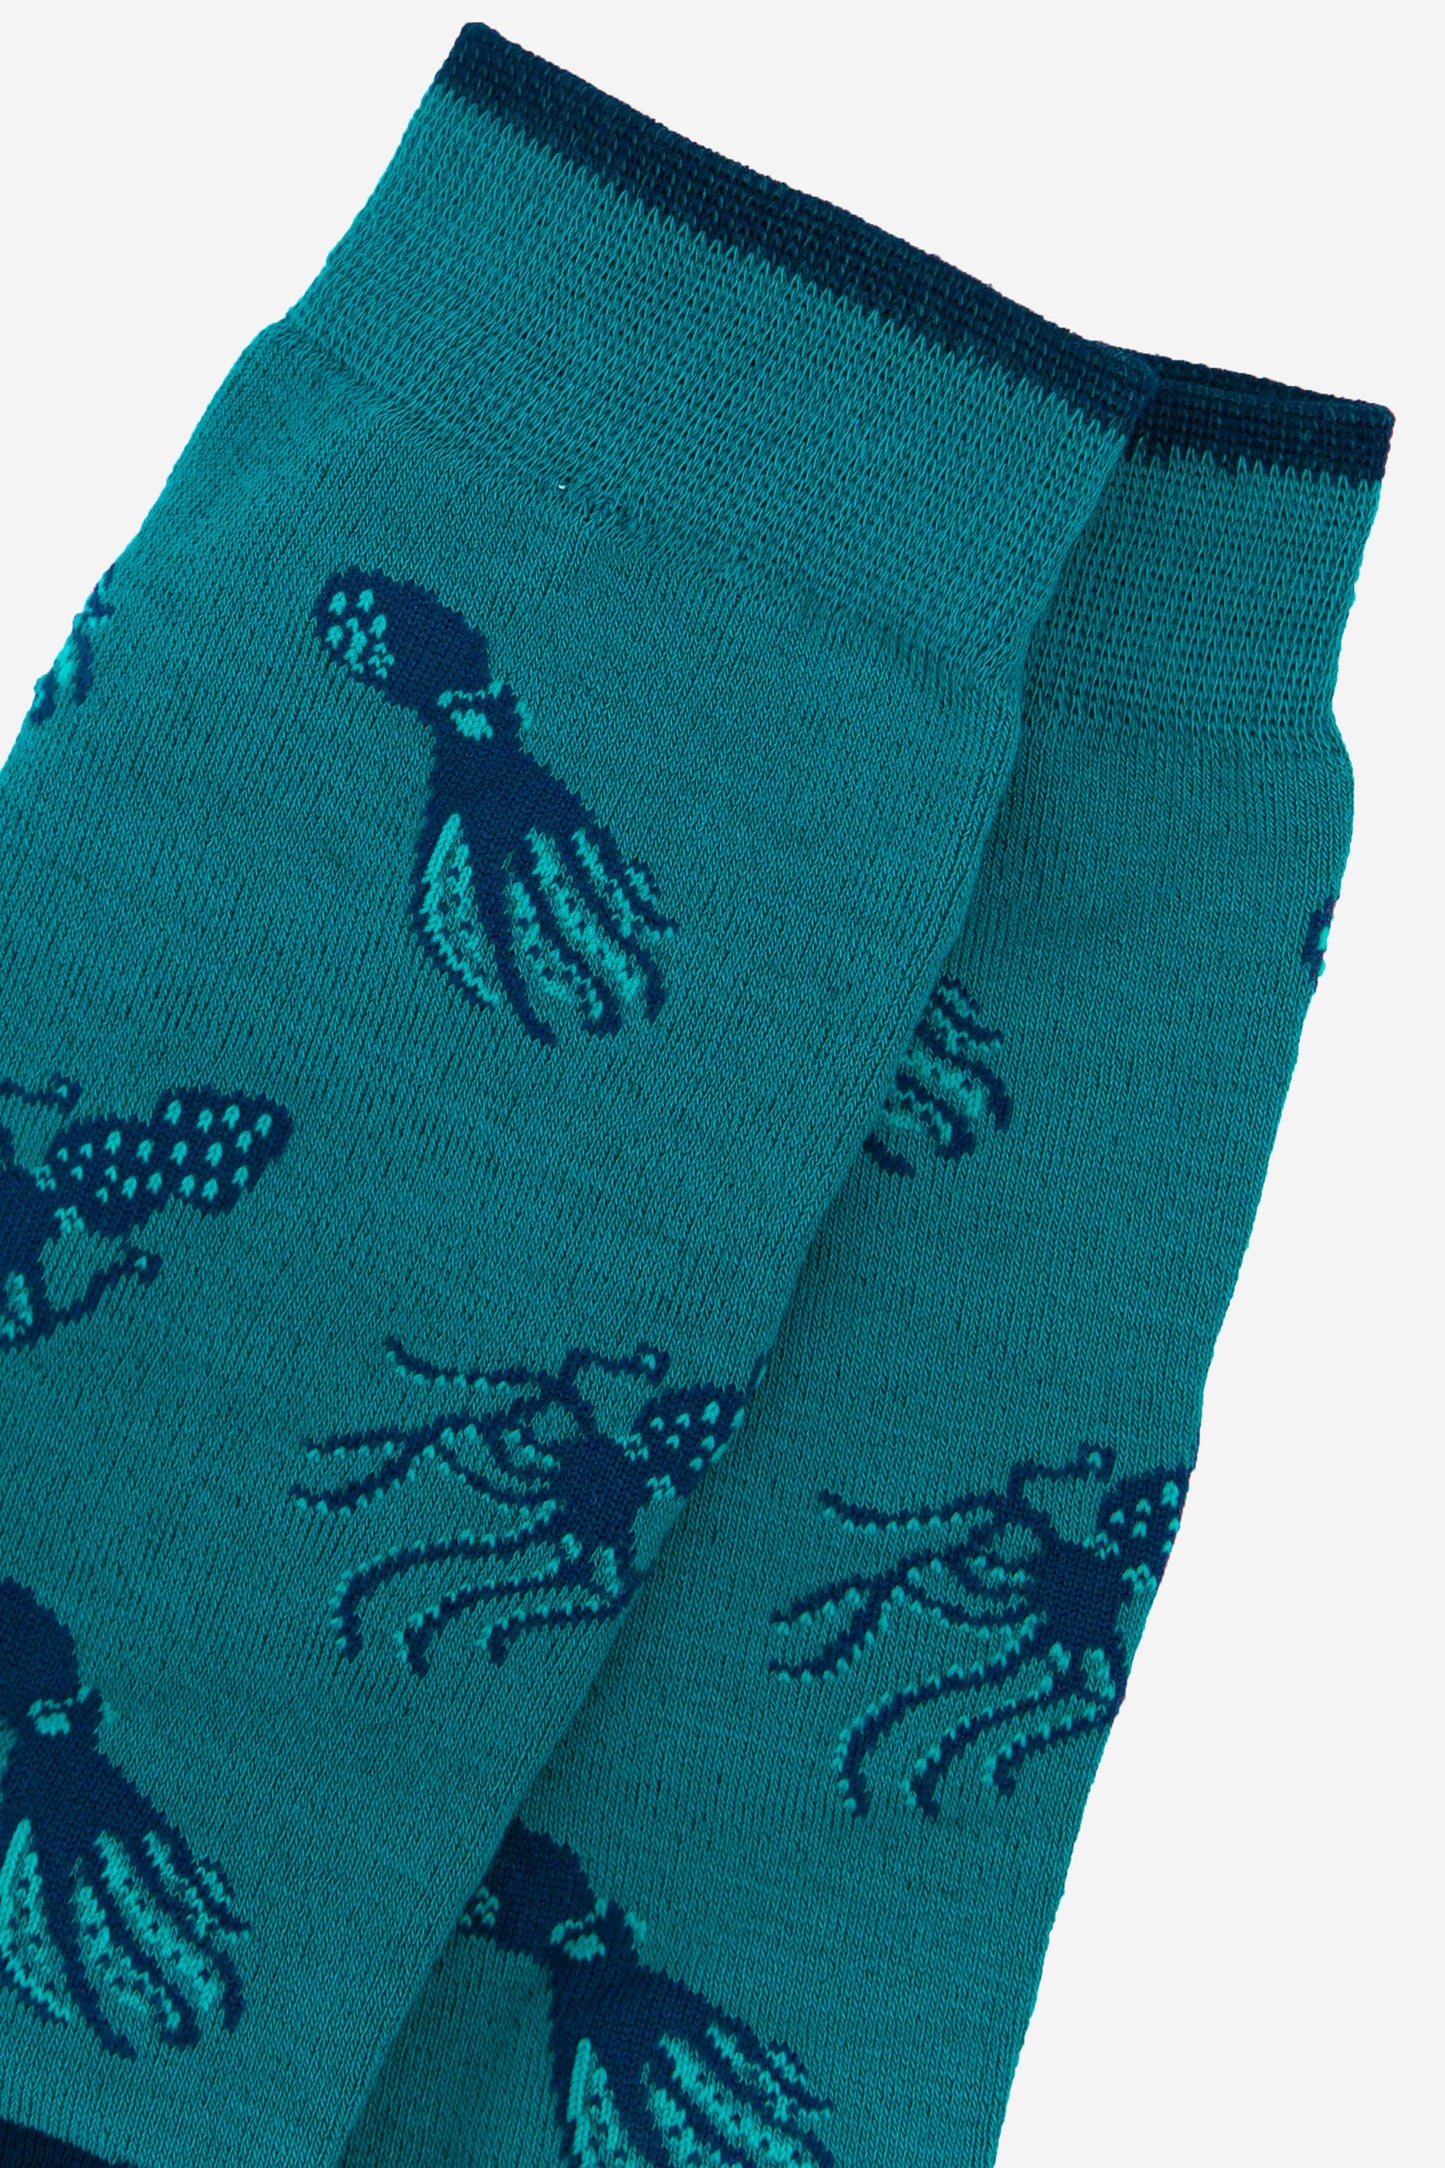 close up of the navy blue squid and octopus pattern on the bamboo socks